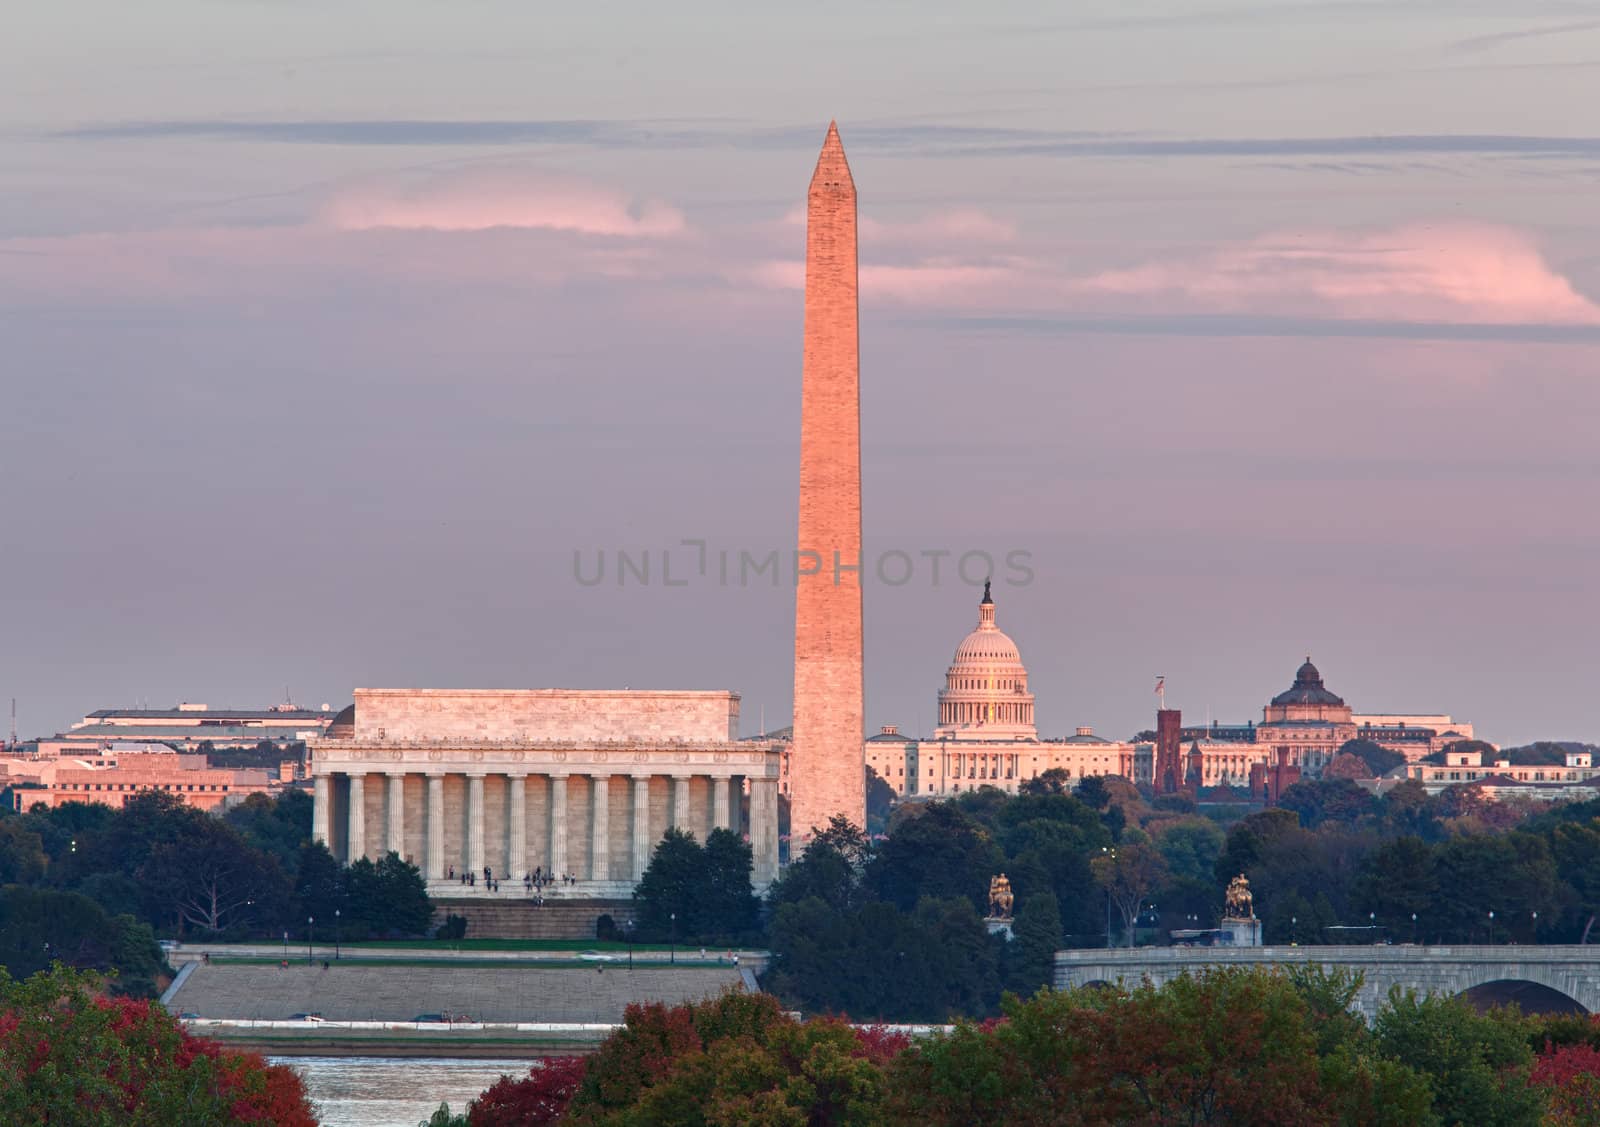 Sunset over Washington DC by steheap